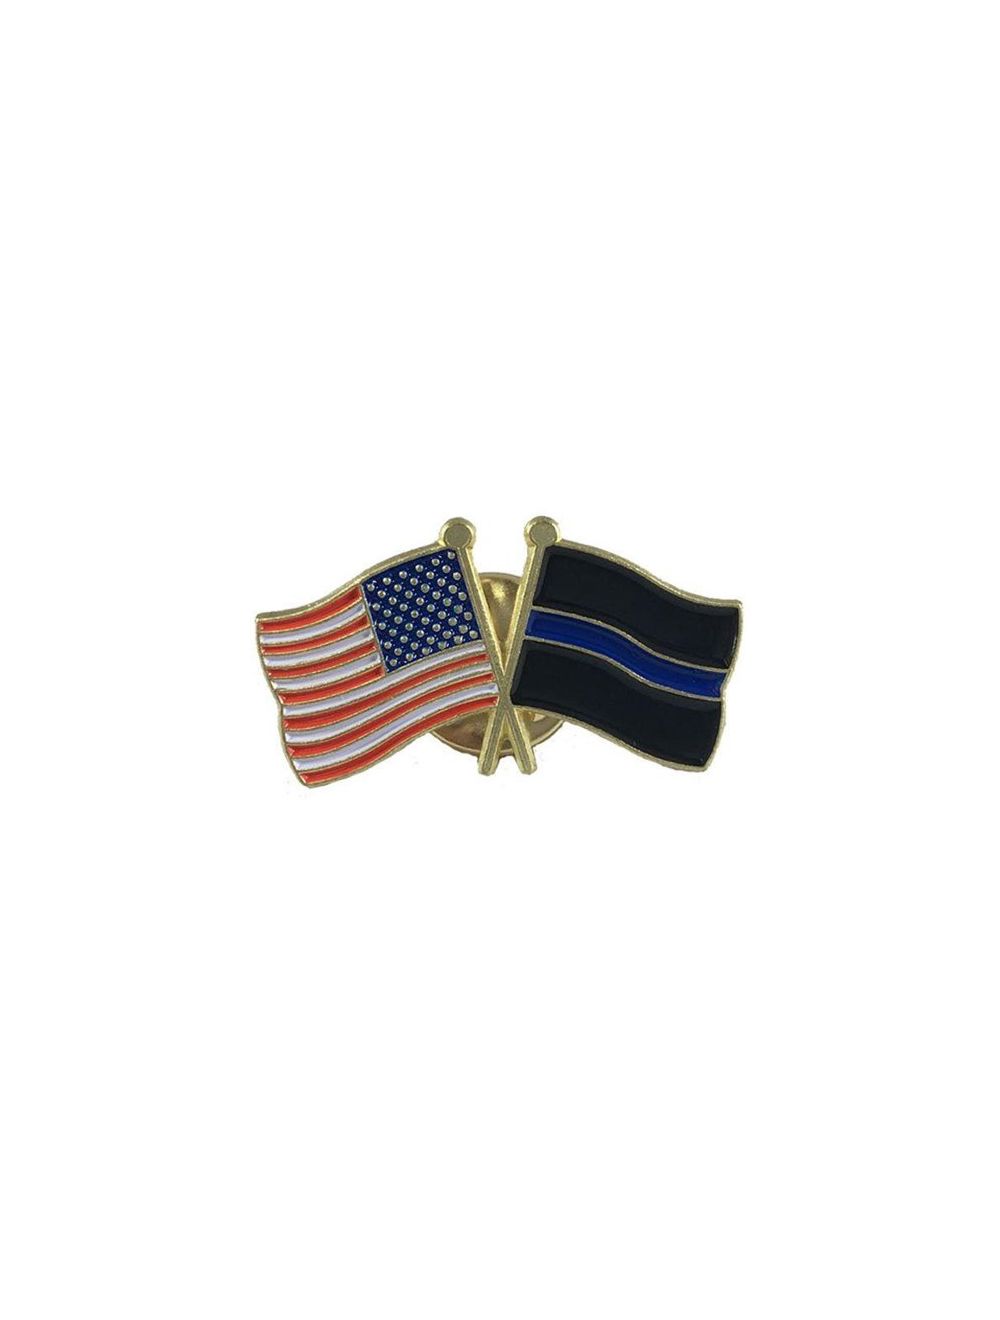 Thin Blue Line (Black Background) and American Pin, Combination